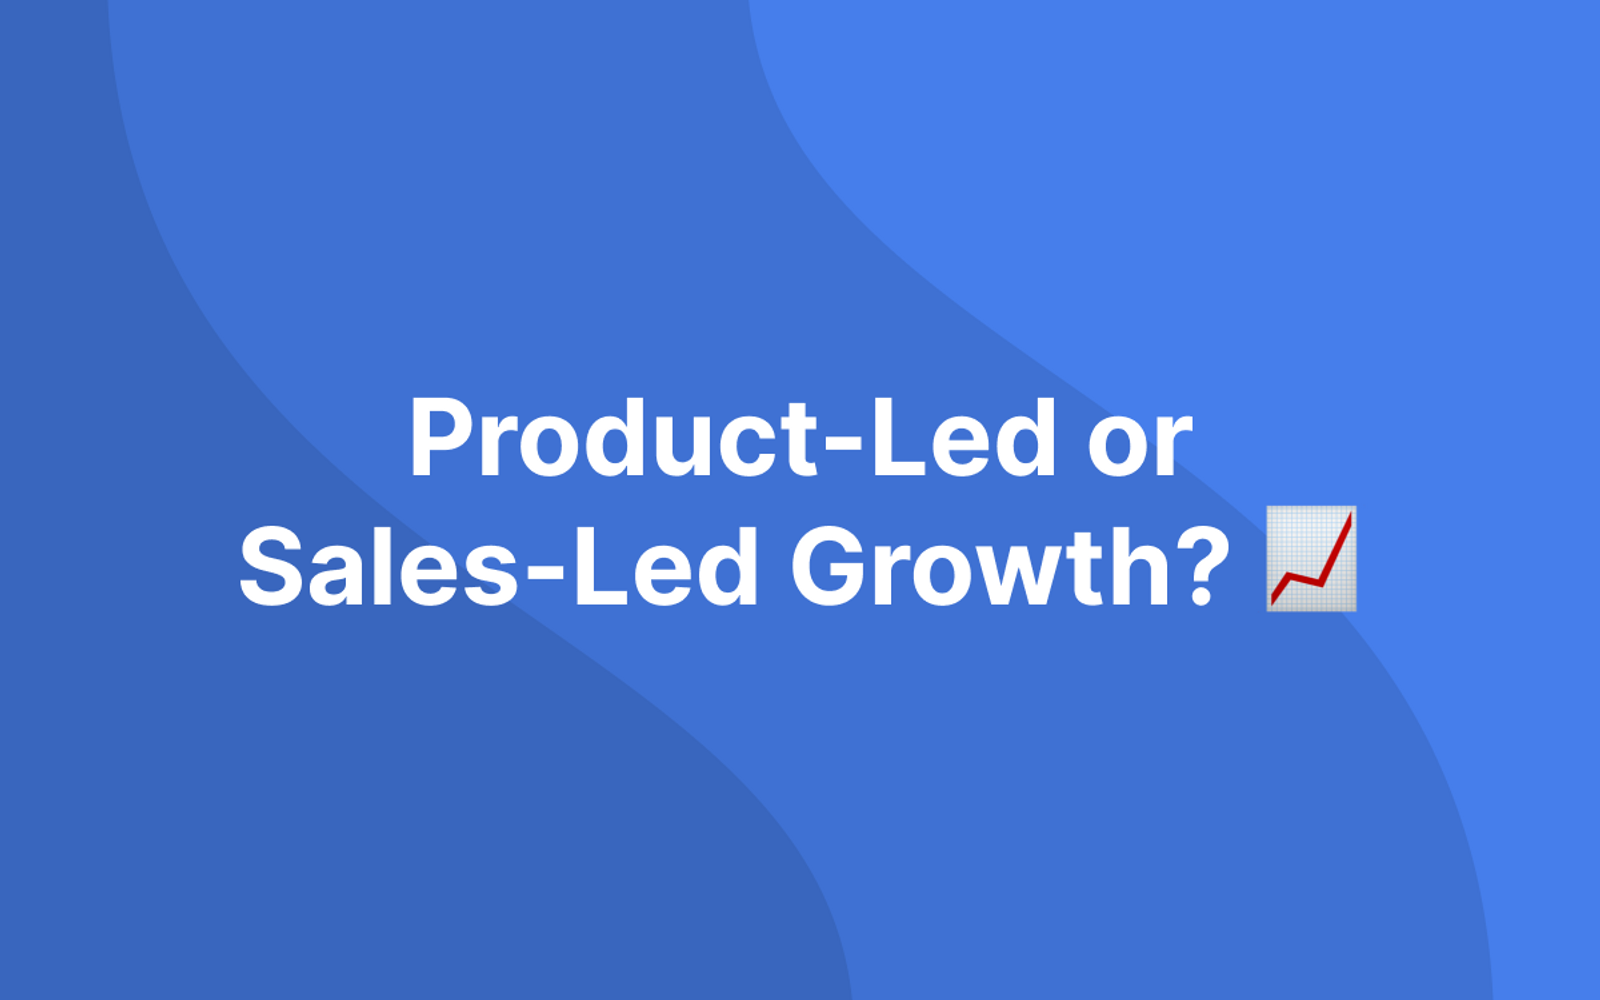 "Product Led or Sales Led Growth?" written on a blue background